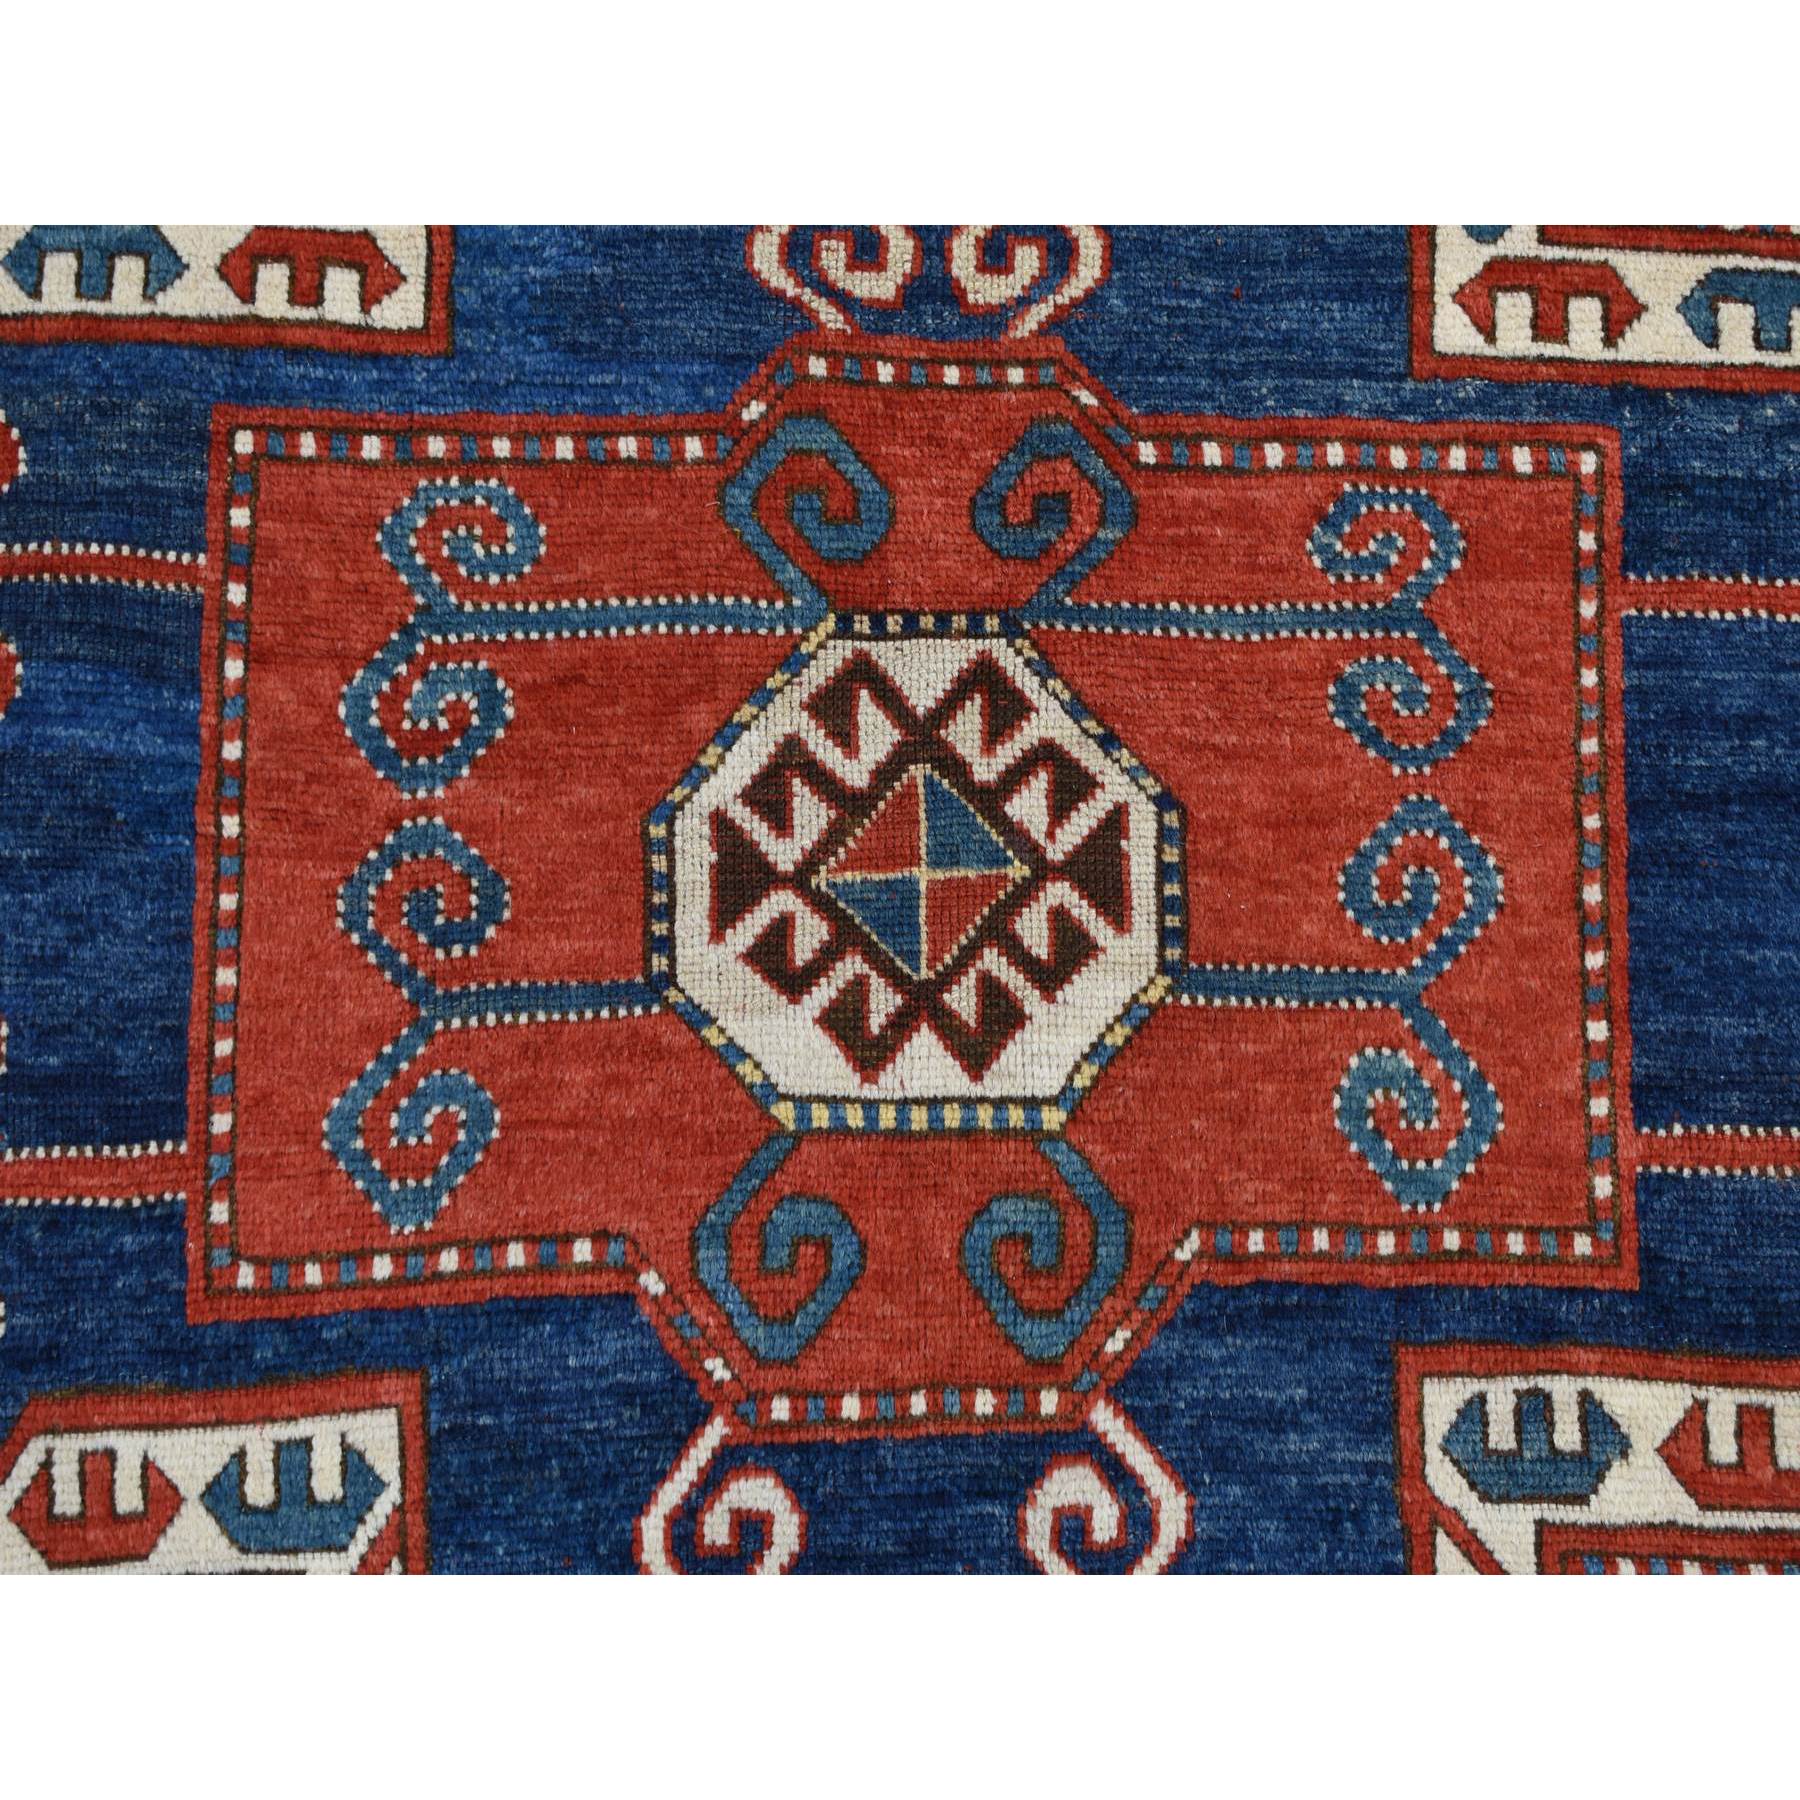  Wool Hand-Knotted Area Rug 6'10